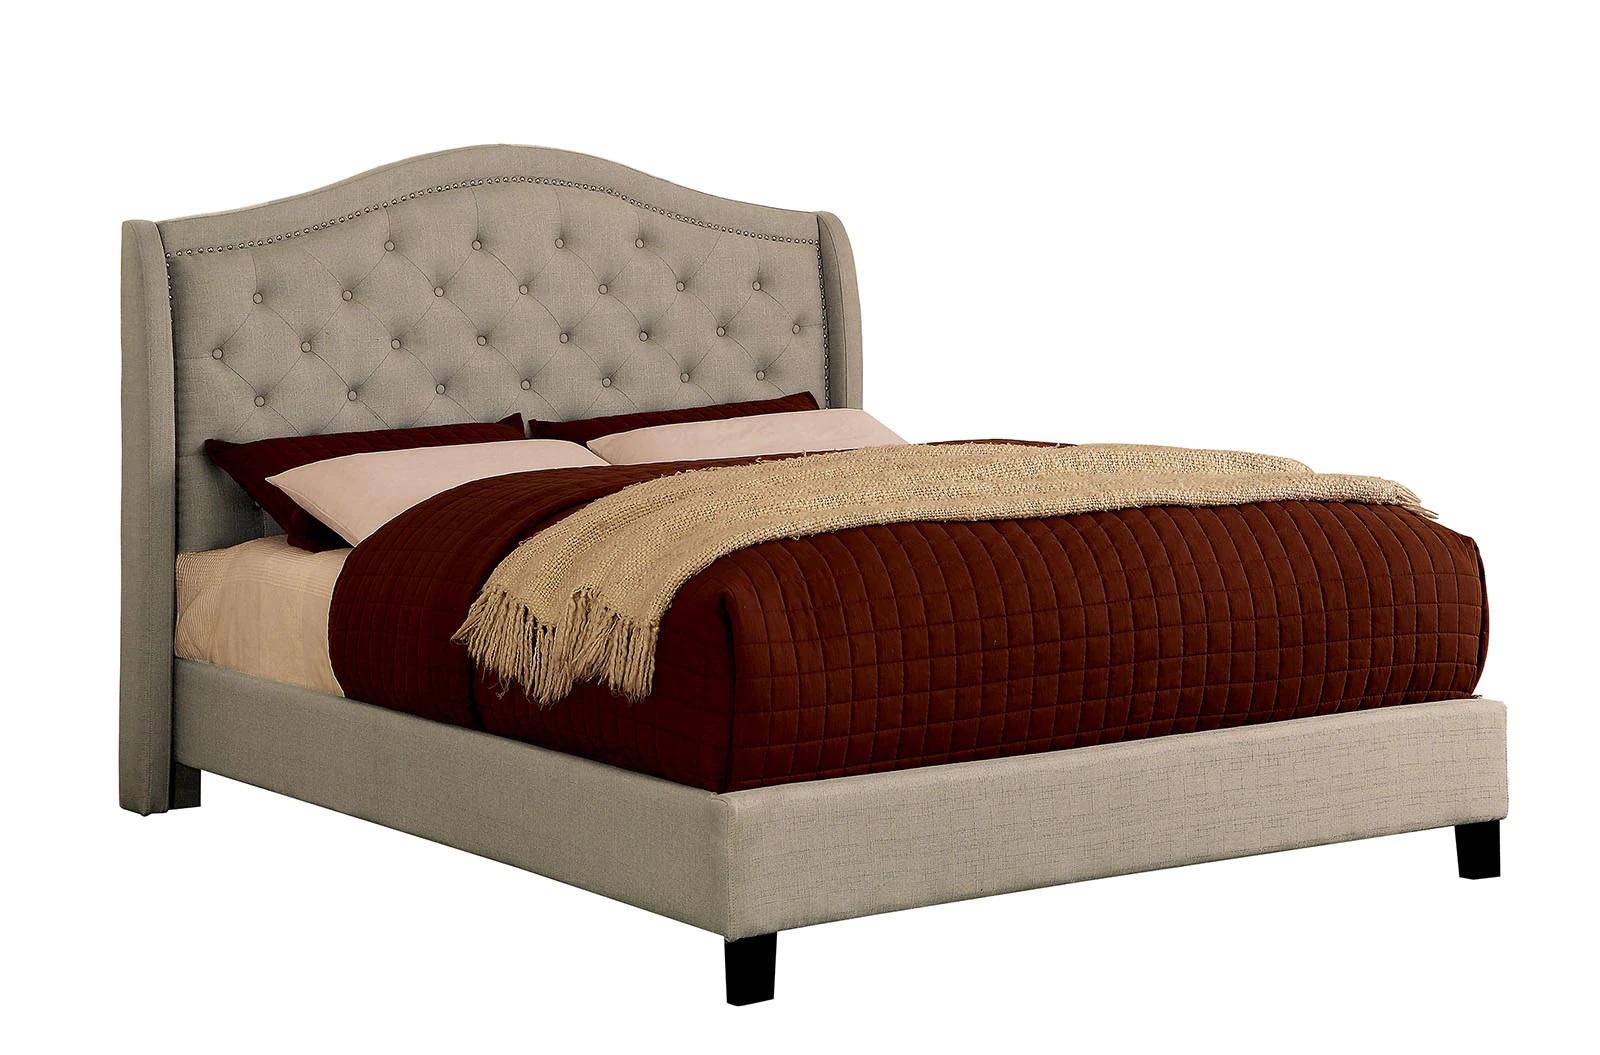 Transitional Platform Bed CM7160-CK Carly CM7160-CK in Warm Gray 